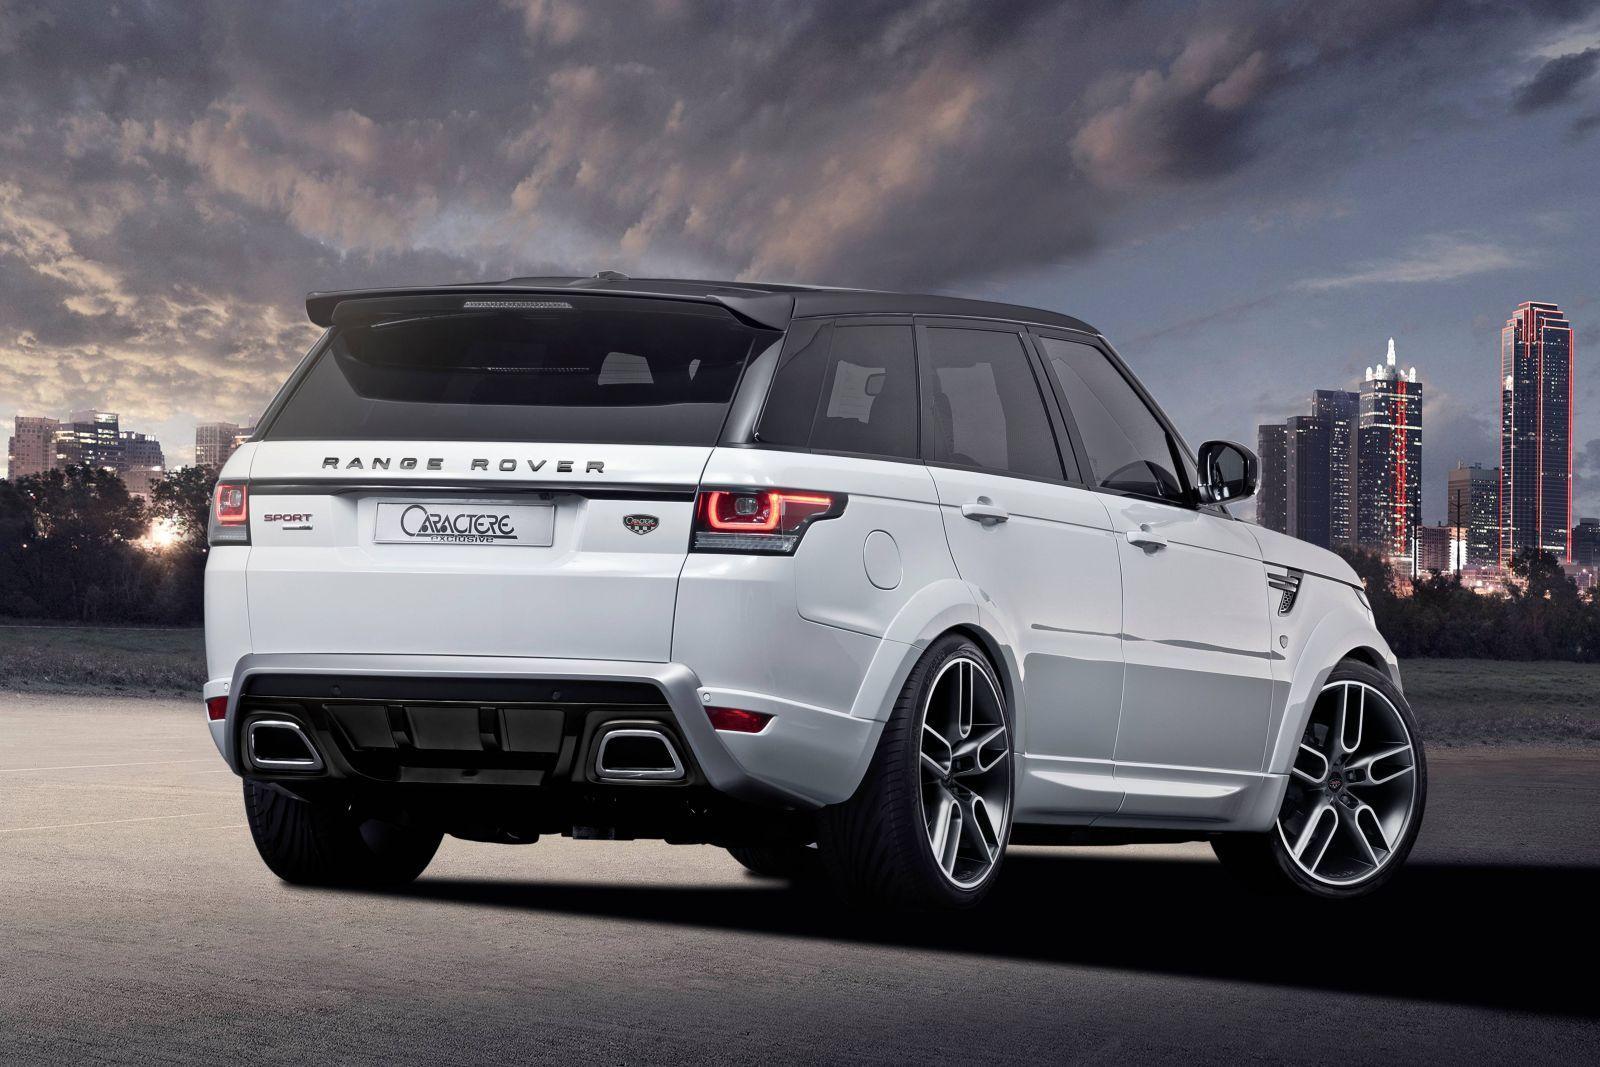 images-products-1-7433-232987913-caractere-exclusive-range-rover-sport-rear-quarter2.jpg